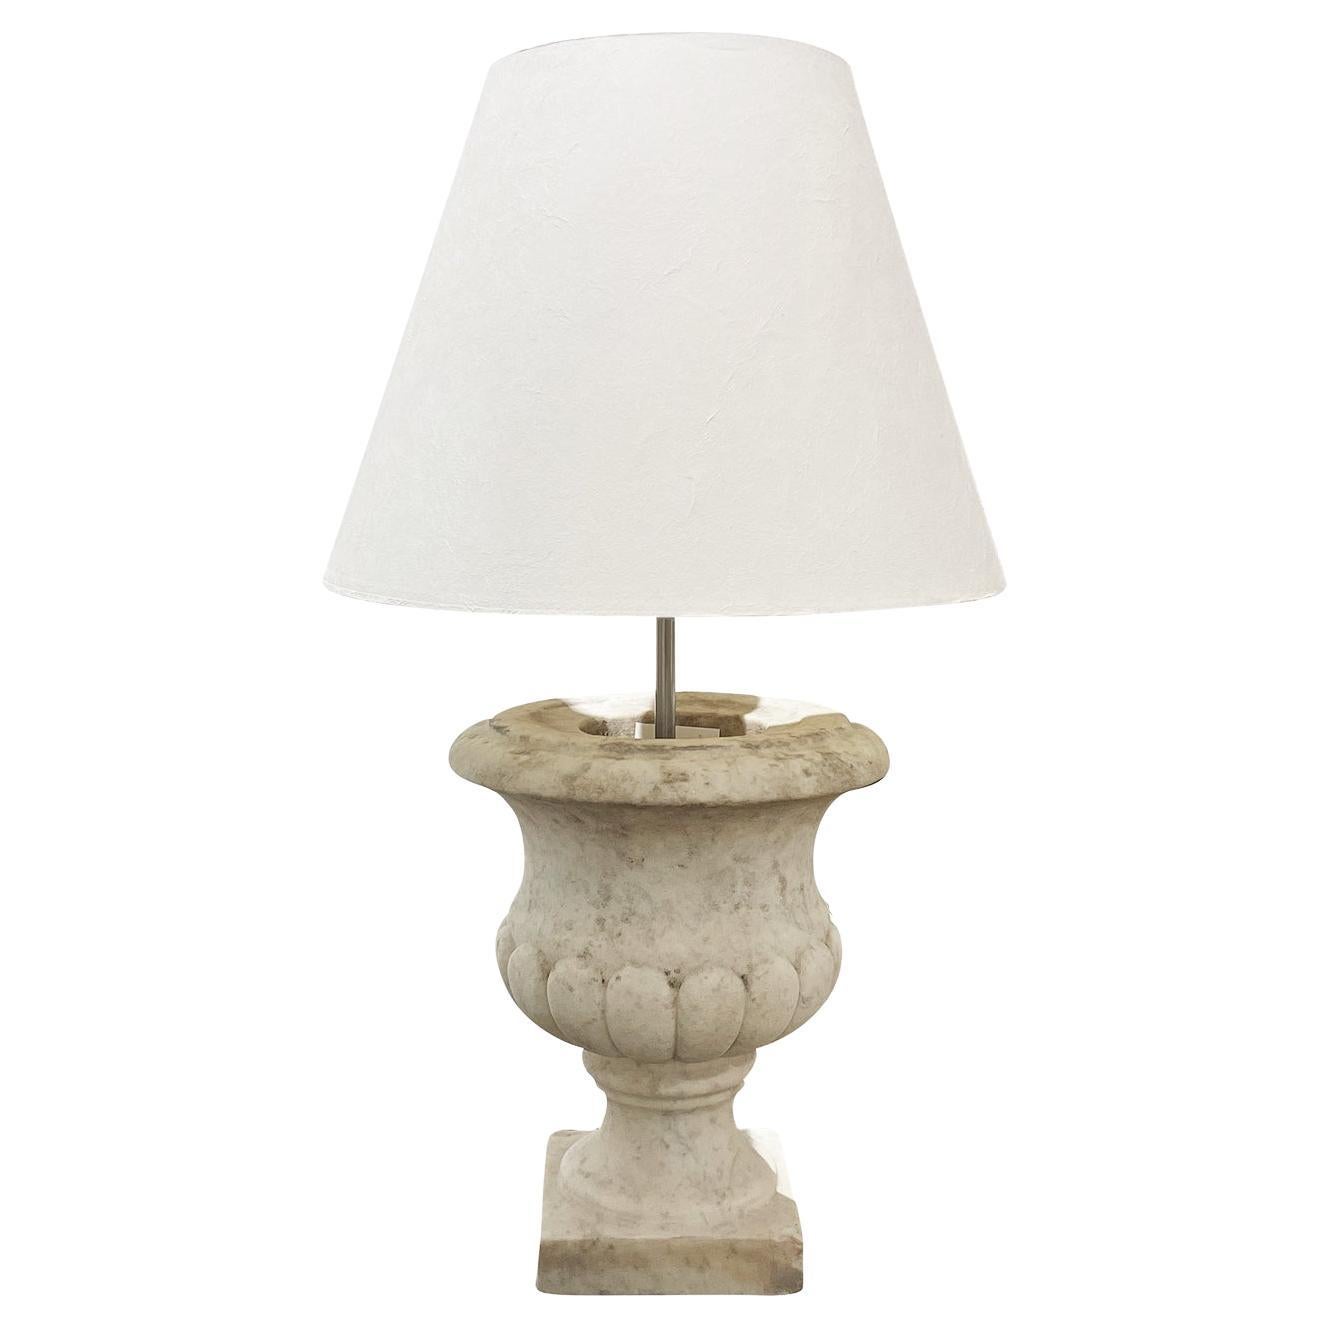 20th Century Italian Modern Marble Table Lamp - Vintage Sculptural Light For Sale